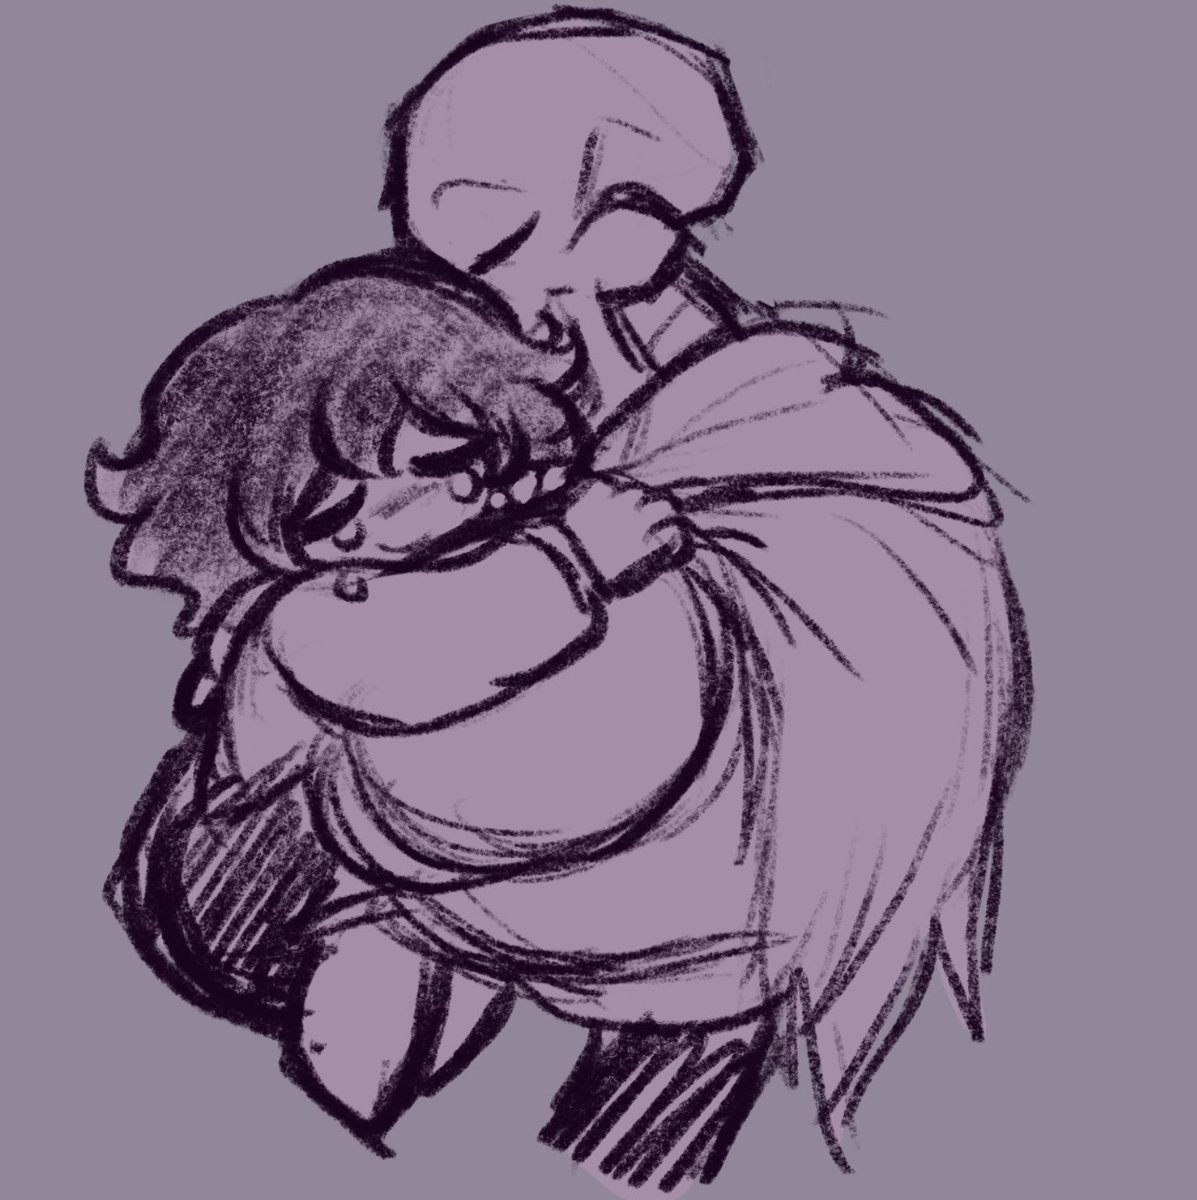 I’ll never know what compelled me to draw them this way
#undertale #papyrus #frisk